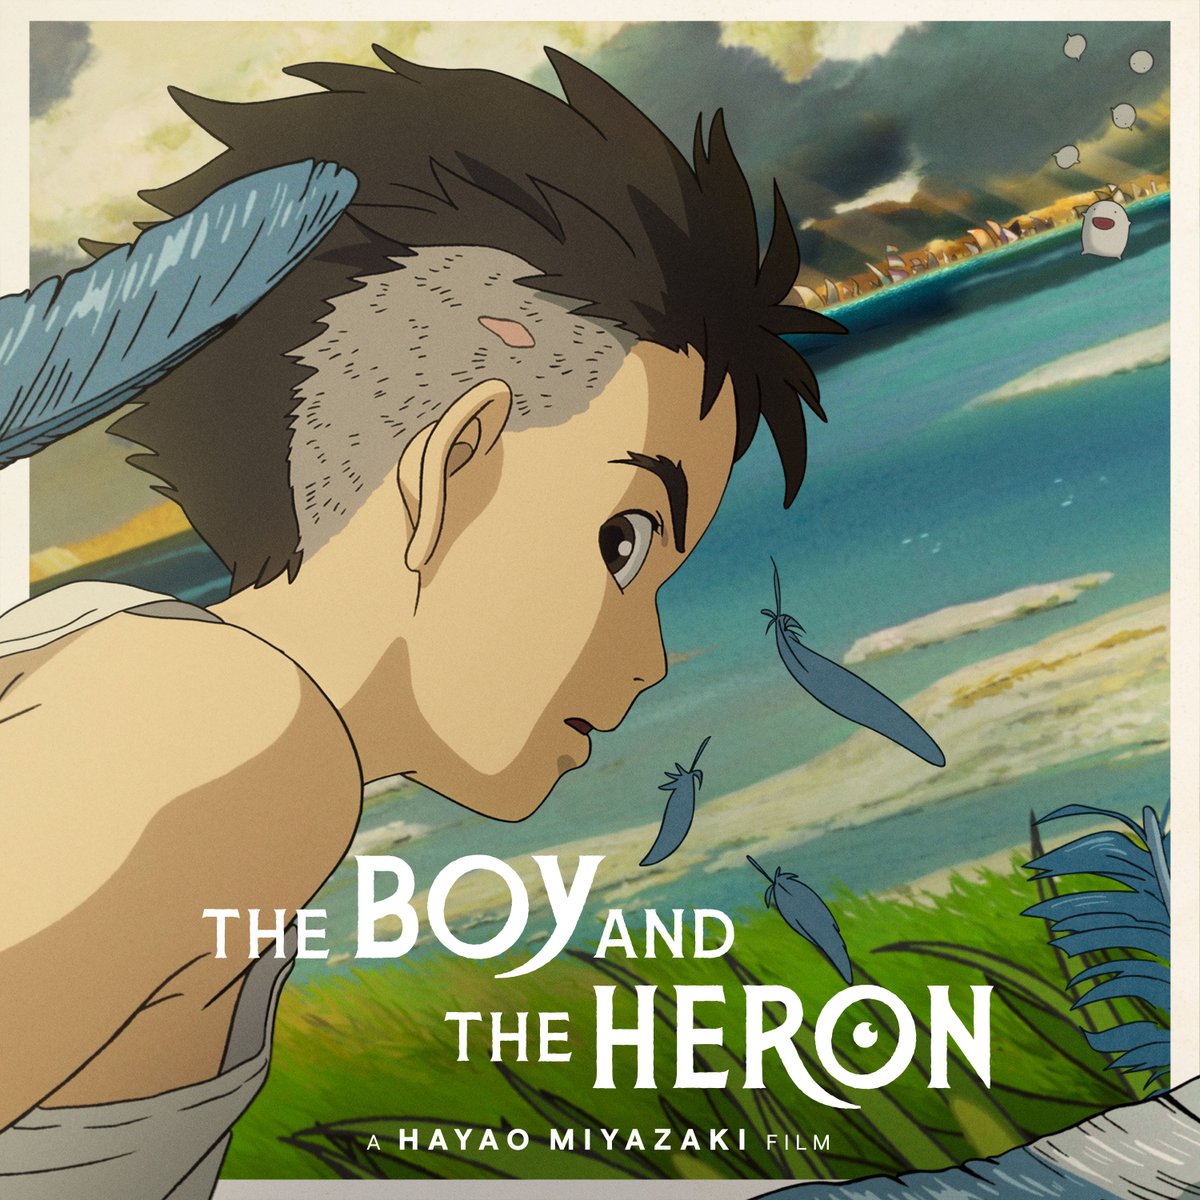 THE BOY AND THE HERON comes to Digital Download on June 25, but you can pre-order the star-studded film now! Discover for yourself why this Hayao Miyazaki masterpiece won the Academy Award for Best Animated Feature Film. bit.ly/3JBwJbj